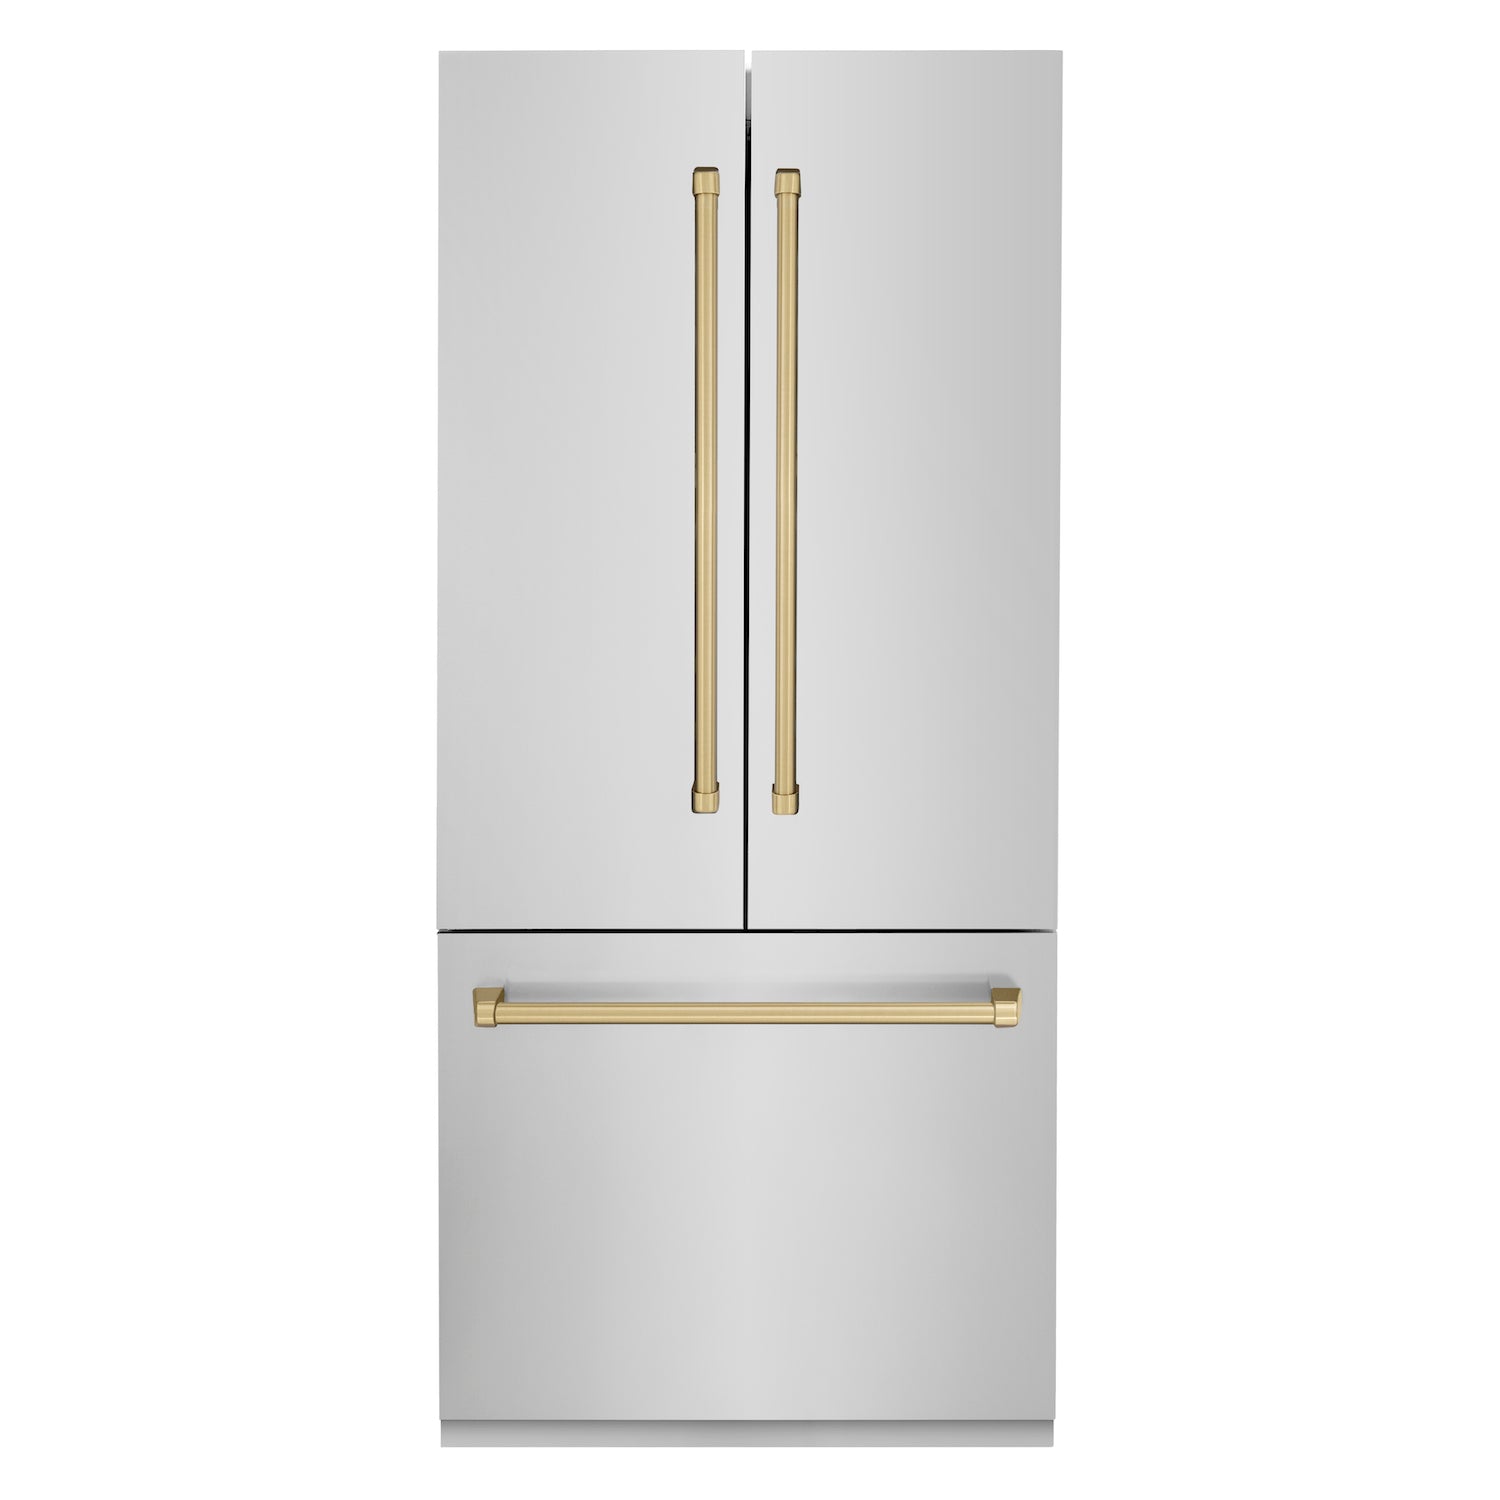 ZLINE 36" Autograph Edition Built-in 2-Door Bottom Freezer Refrigerator - Stainless Steel with Champagne Bronze Accents, Internal Water and Ice Dispenser